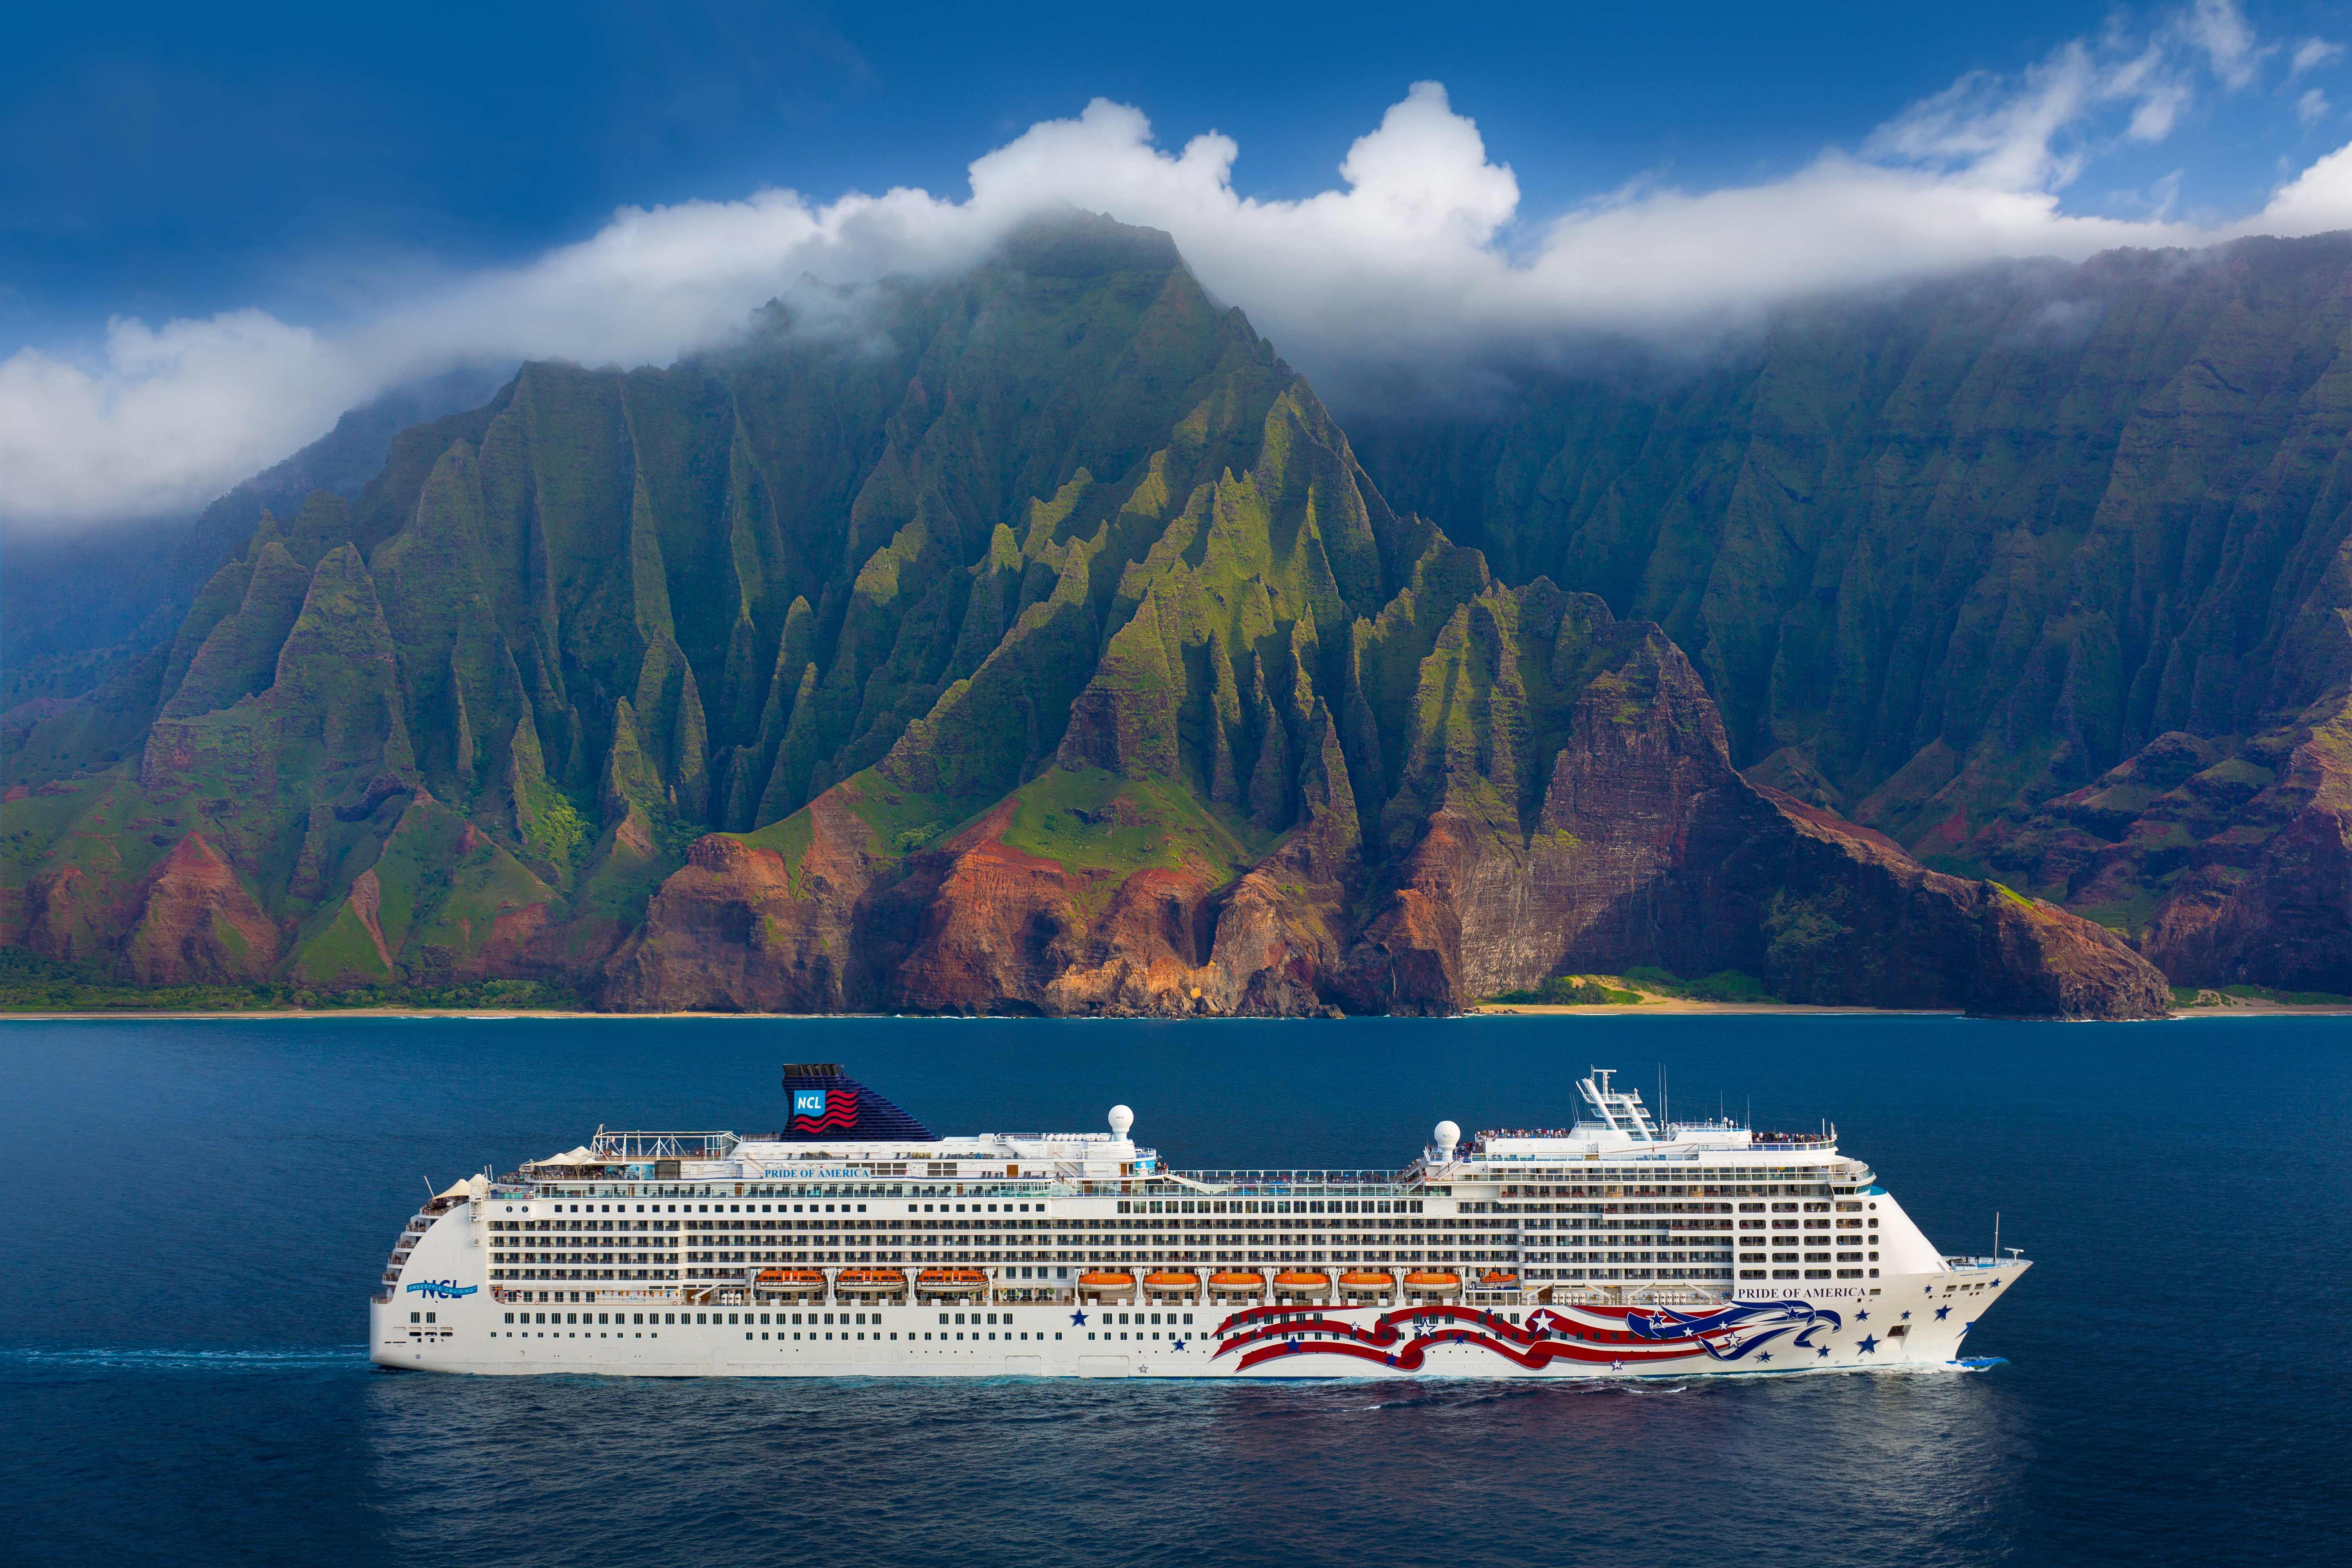 Journey up and down the east coast, west coast, and more with United States cruises